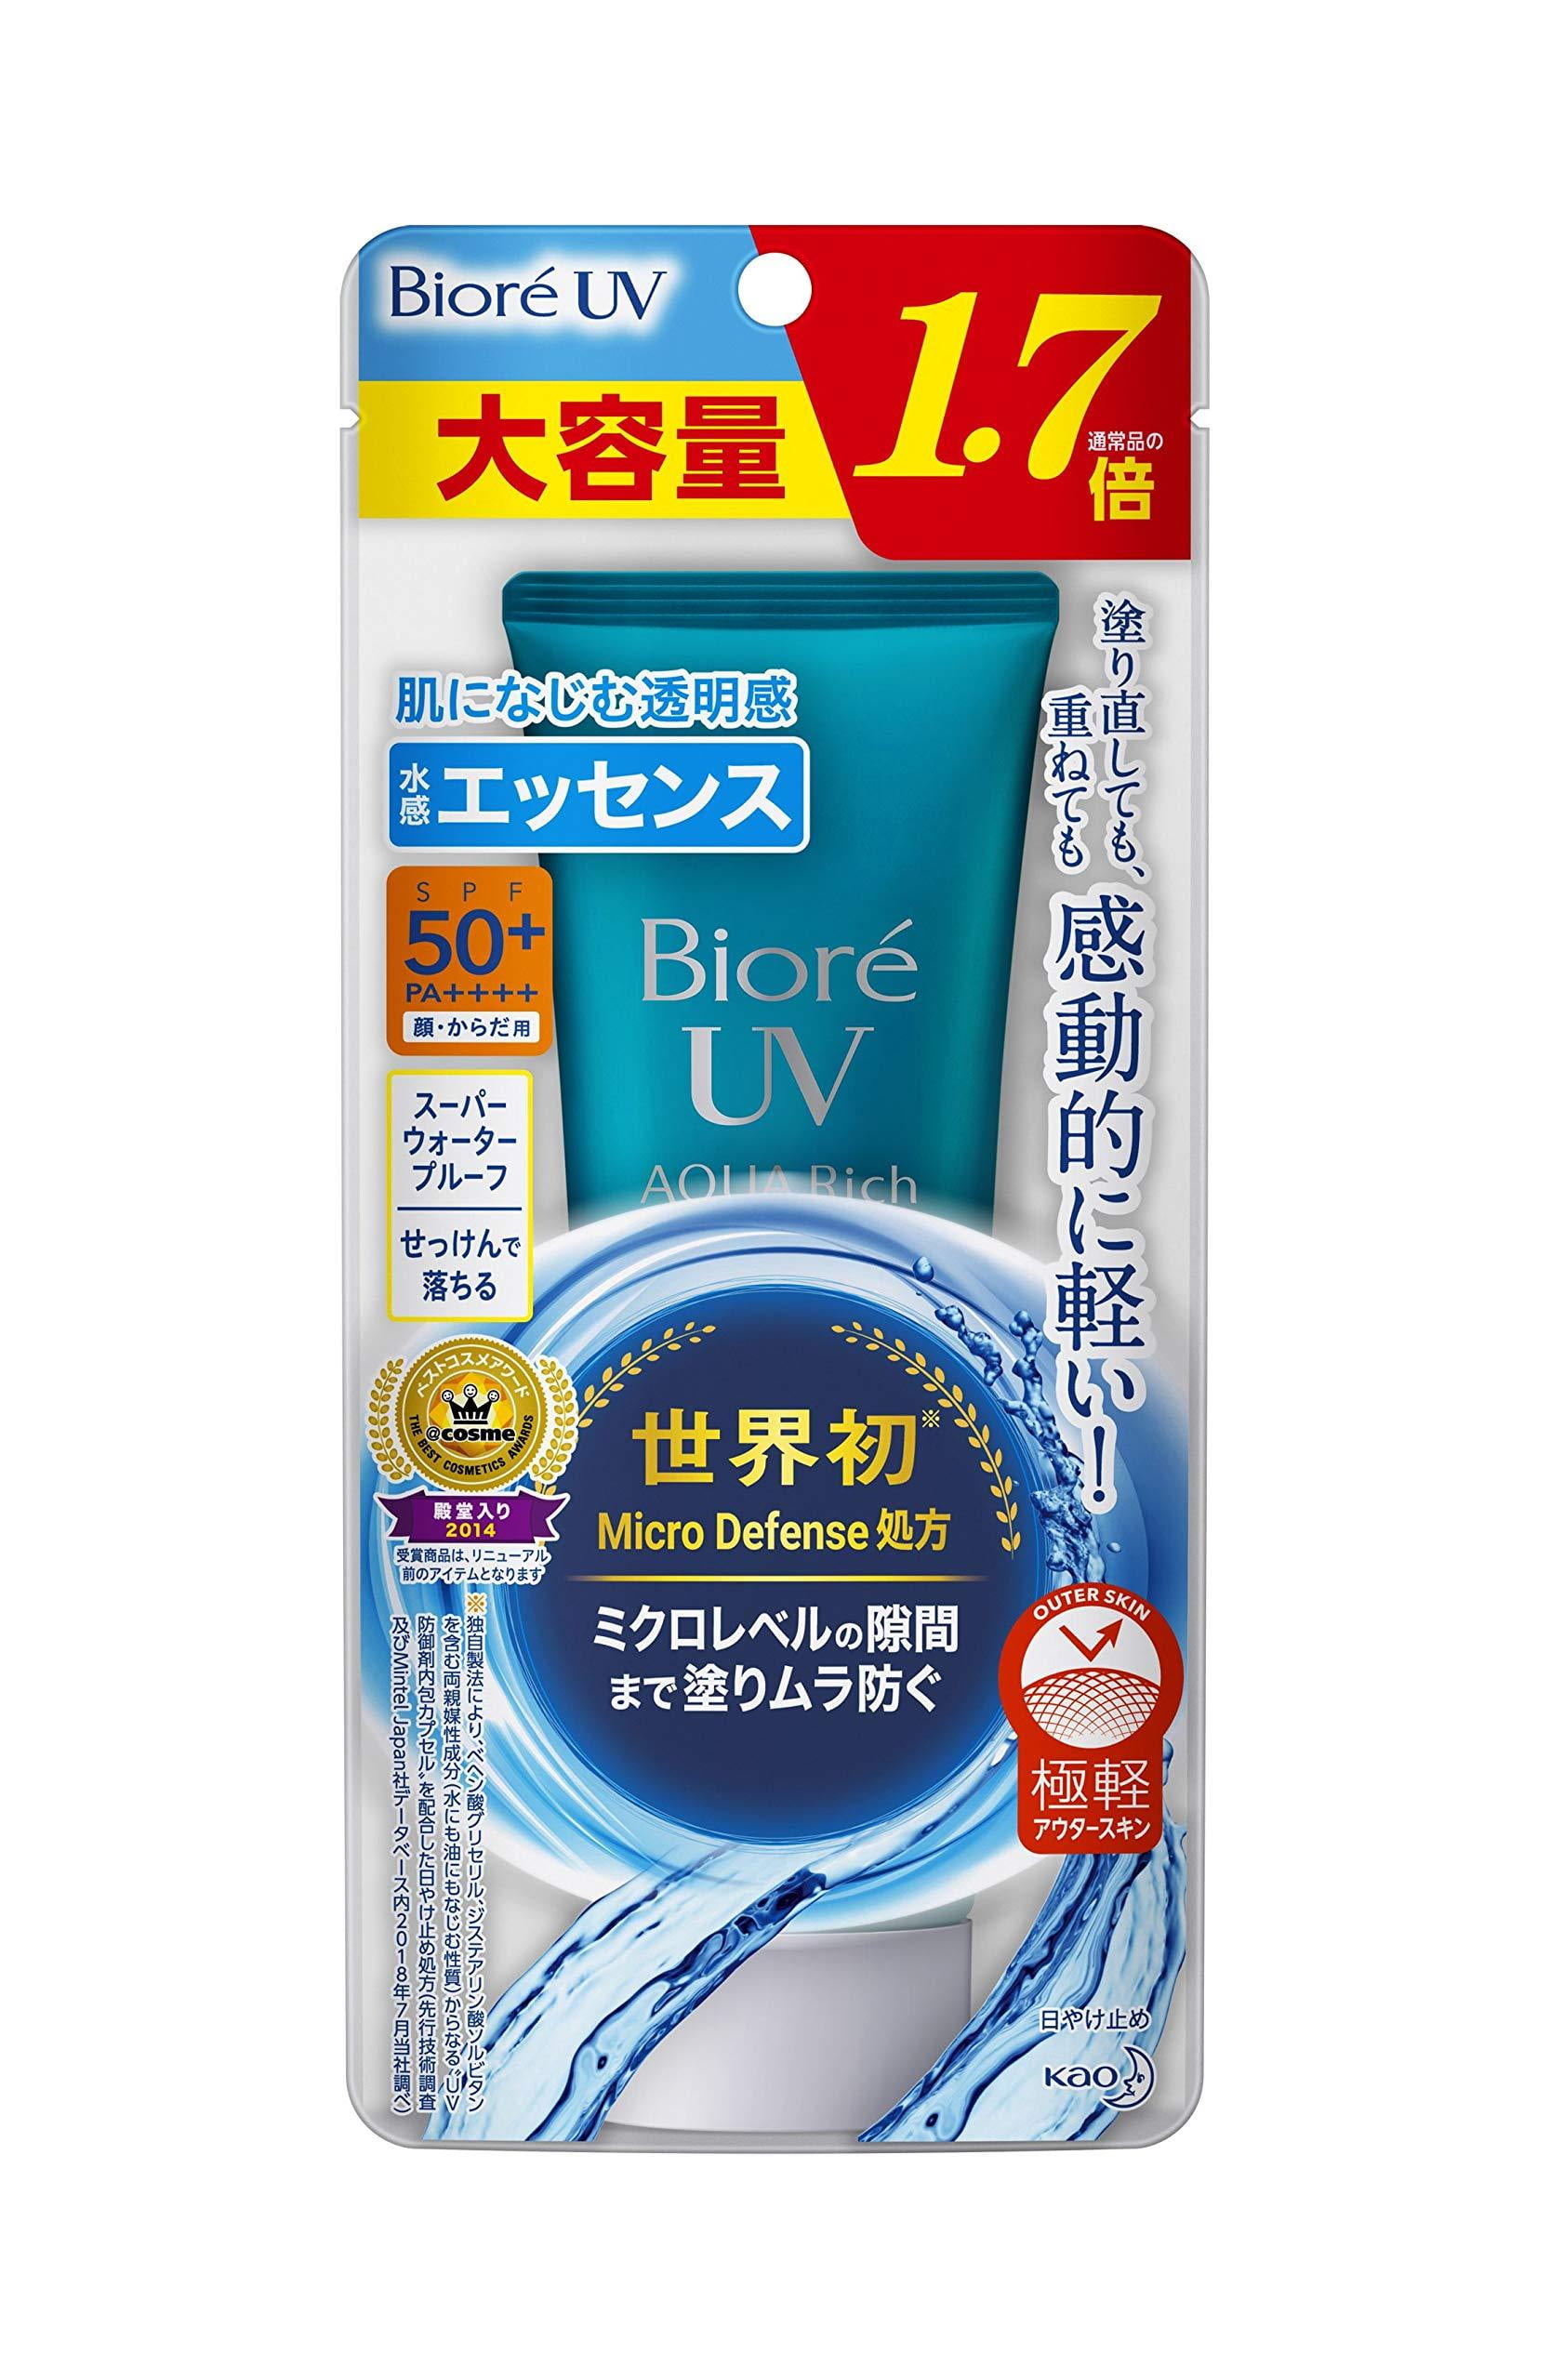 Biore UV Aqua Rich Watery 85 g (1.7 times the normal product) Sunscreen SPF 50 + / PA ++++【Large capacity】 2019 Ver